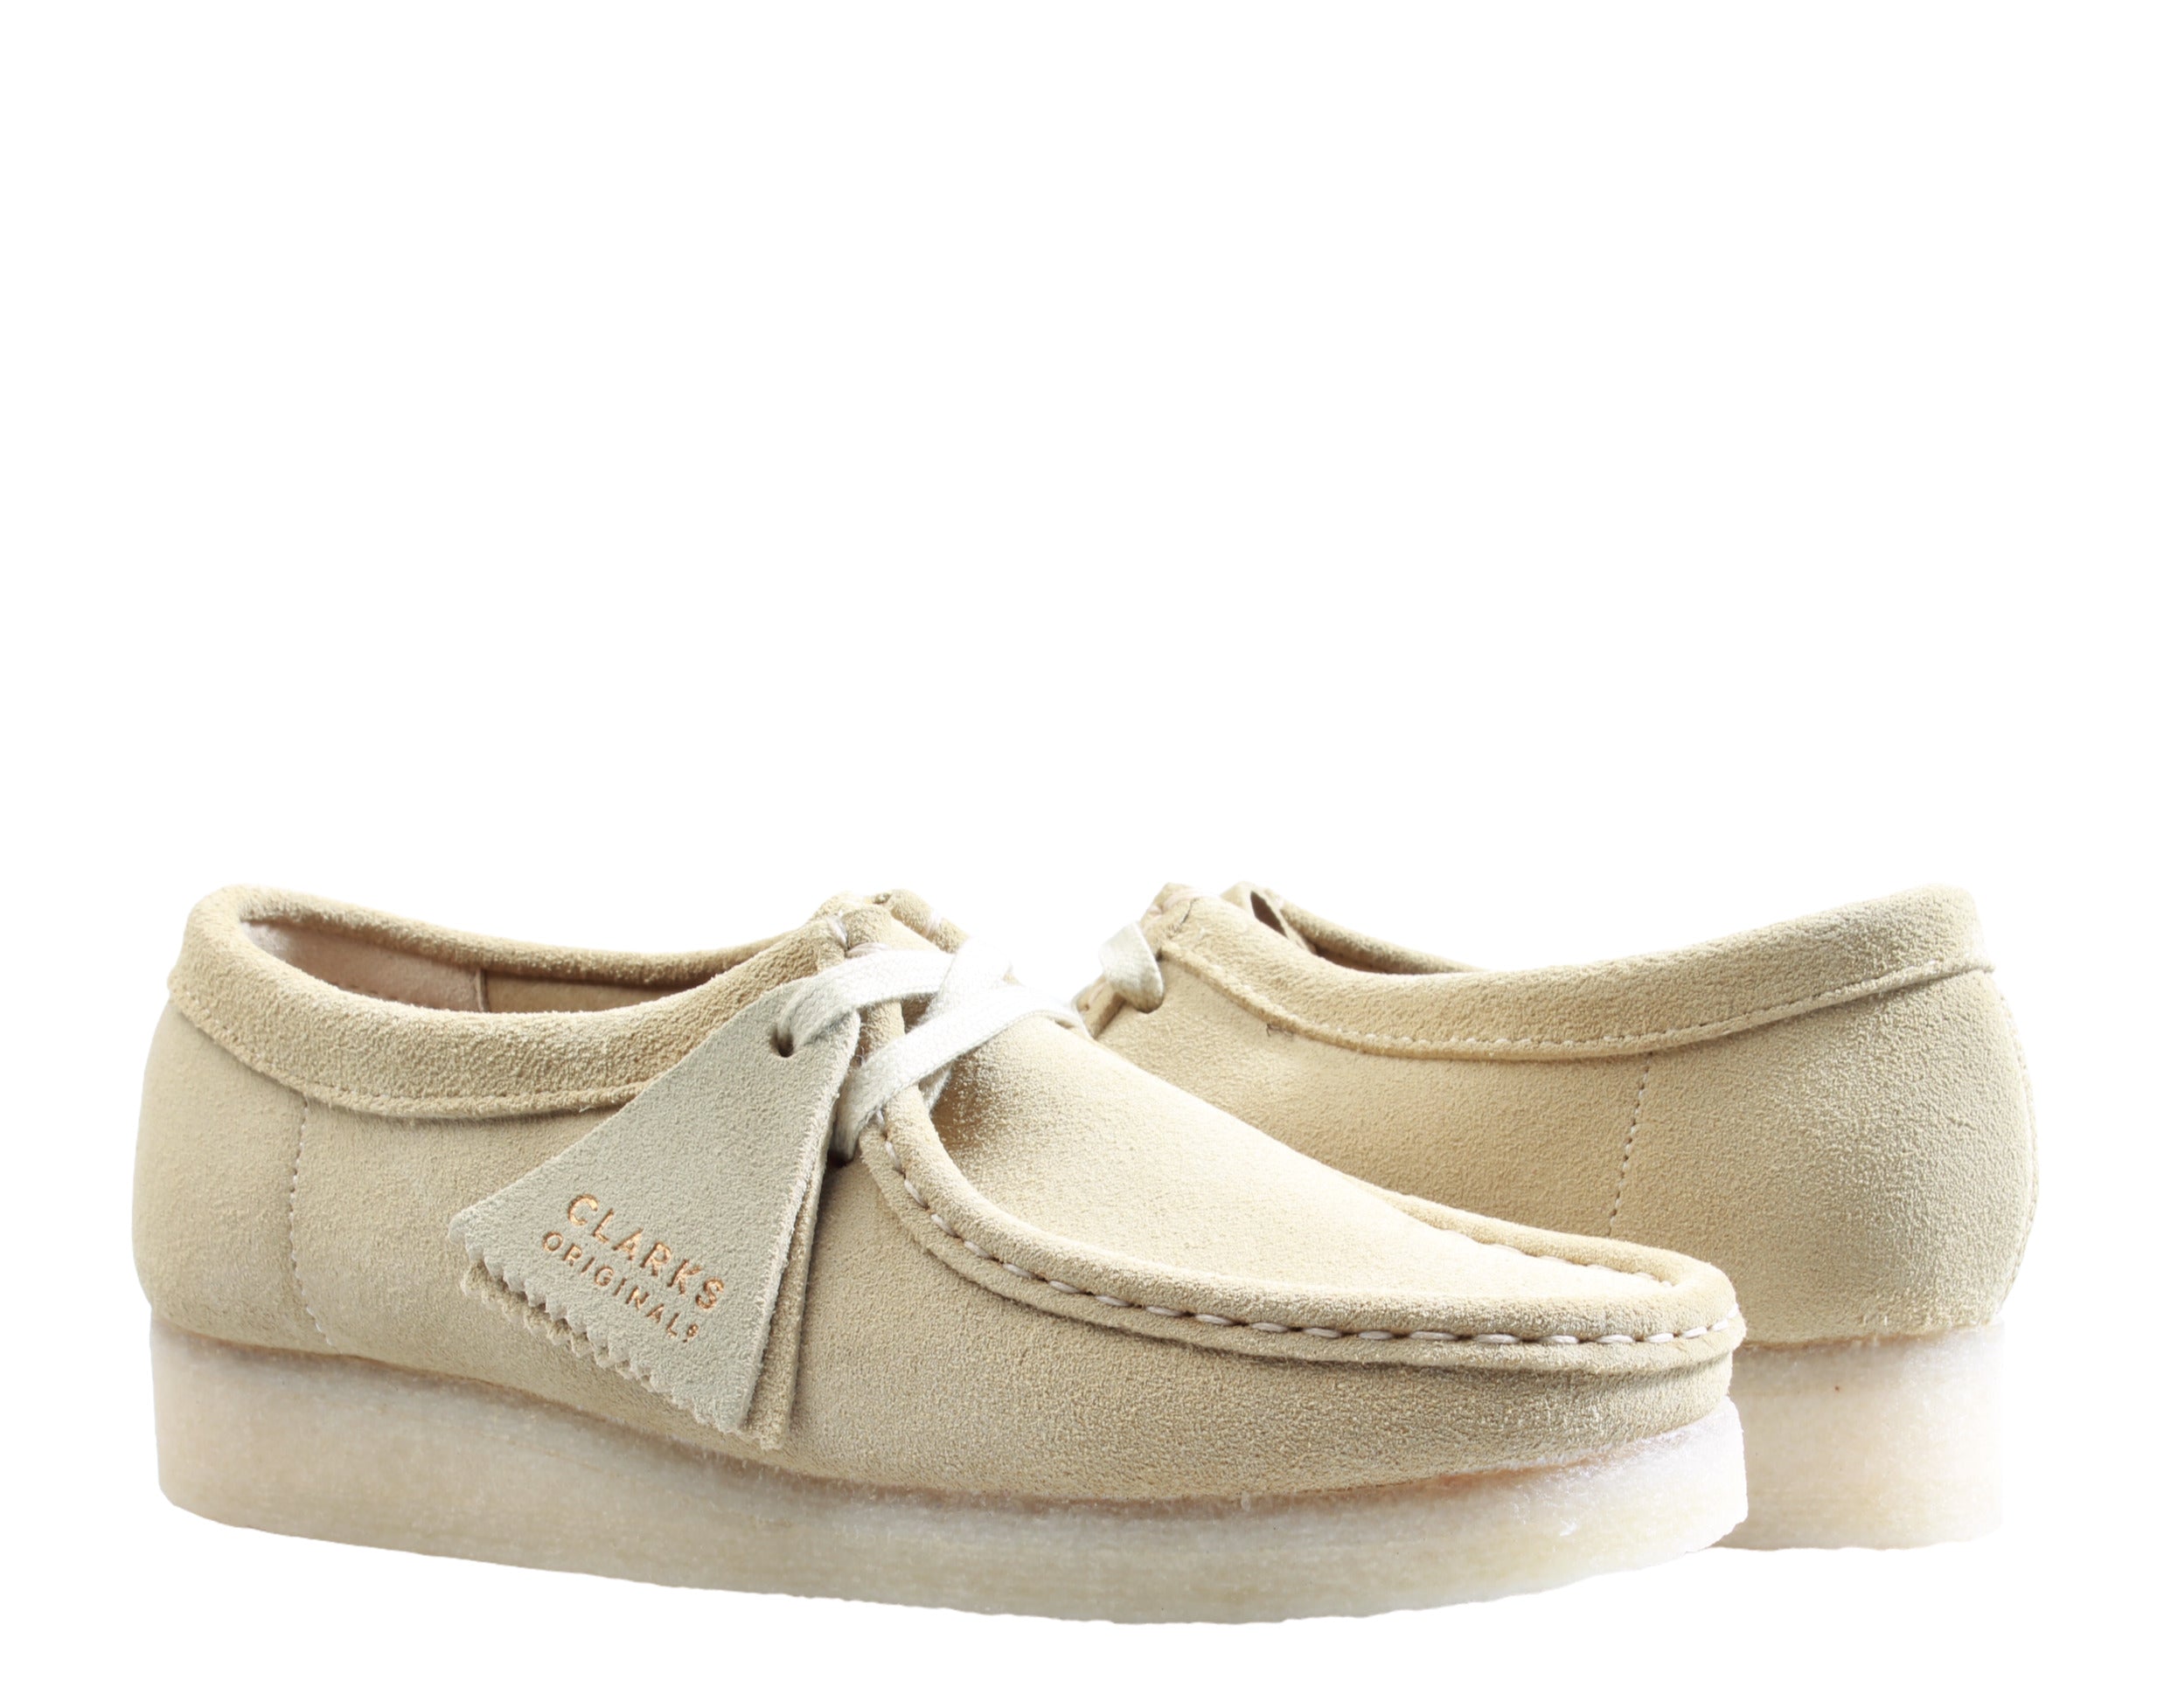 Clarks Originals Wallabee Women's Casual Shoes NYCMode